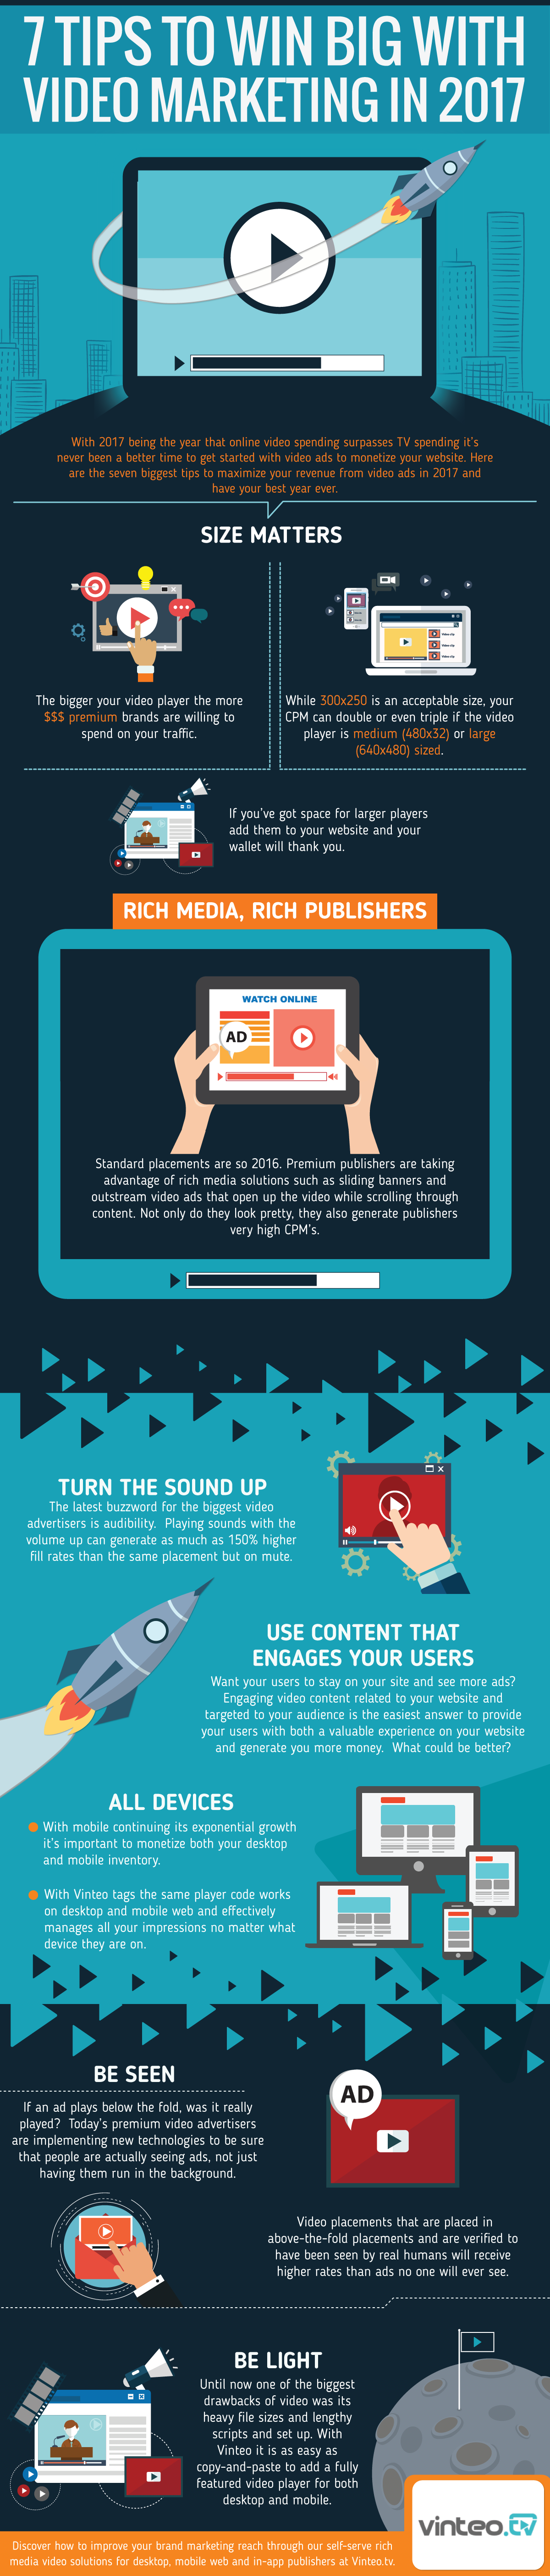 7 Tips to Win Big with Video Marketing in 2017 - #infographic